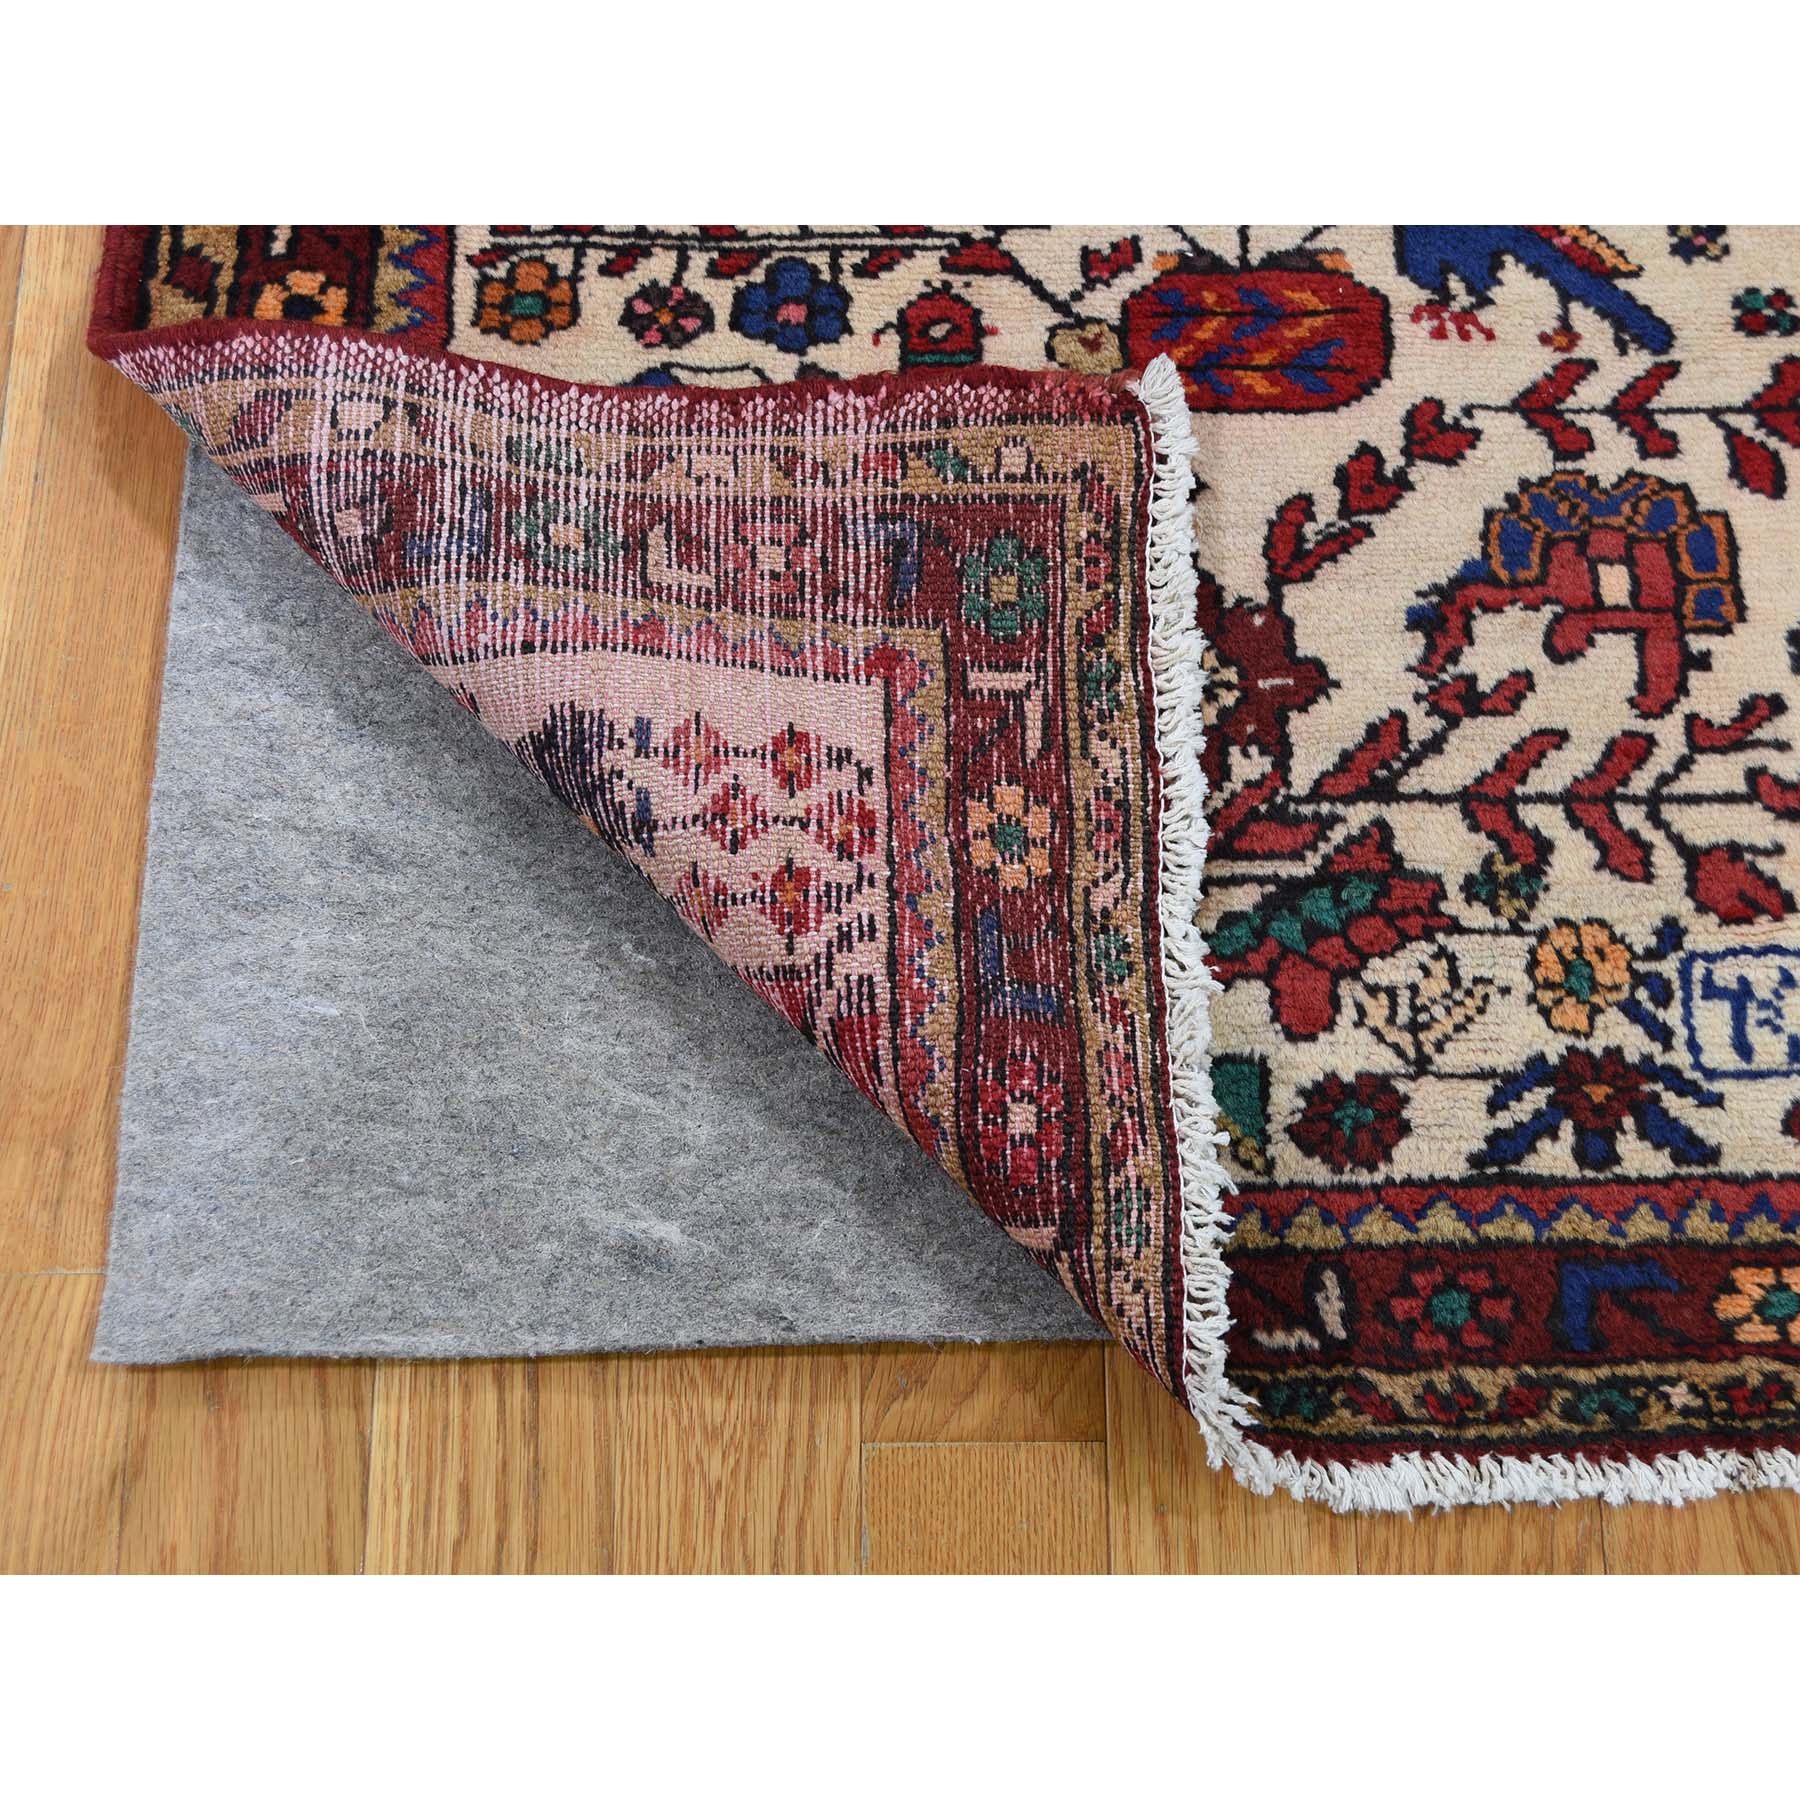 2-8 x4- Vintage Persian Hamadan With Birds Pure Wool Hand-Knotted Oriental Rug 